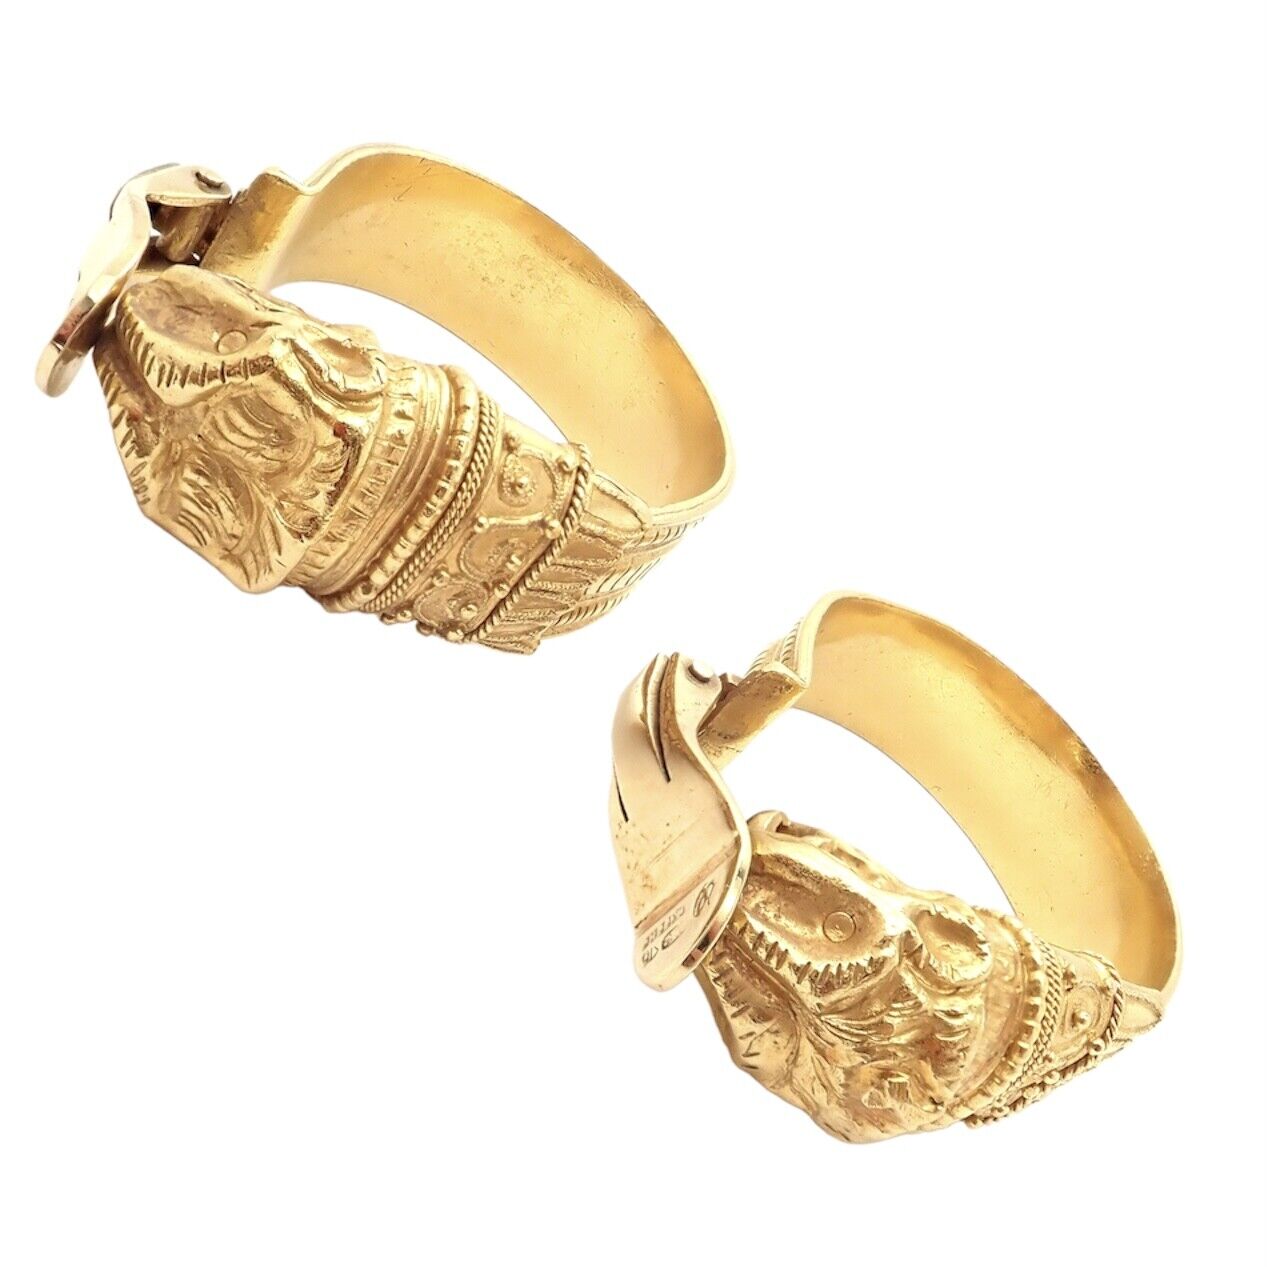 Lalaounis Jewelry & Watches:Vintage & Antique Jewelry:Earrings Vintage Estate Ilias Lalaounis 18k Yellow Gold Cobra Chimera Hoop Earrings